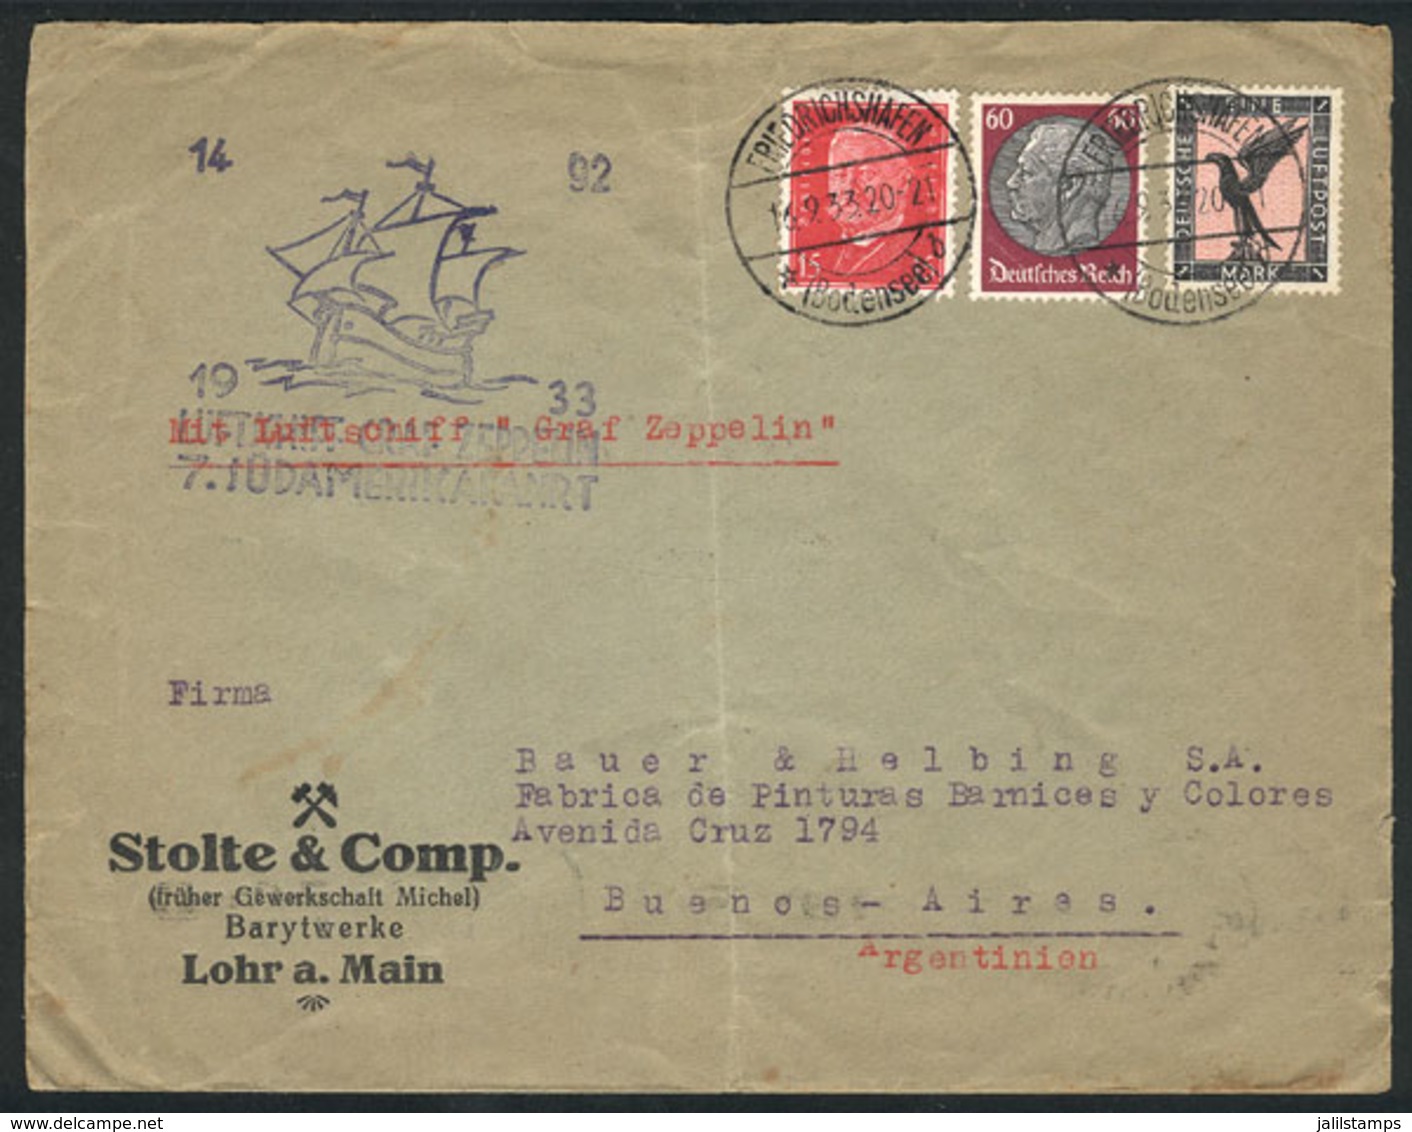 GERMANY: Cover Sent Via ZEPPELIN From Friedrichshafen To Buenos Aires On 16/SE/1933, Minor Defects, Very Nice! - Covers & Documents